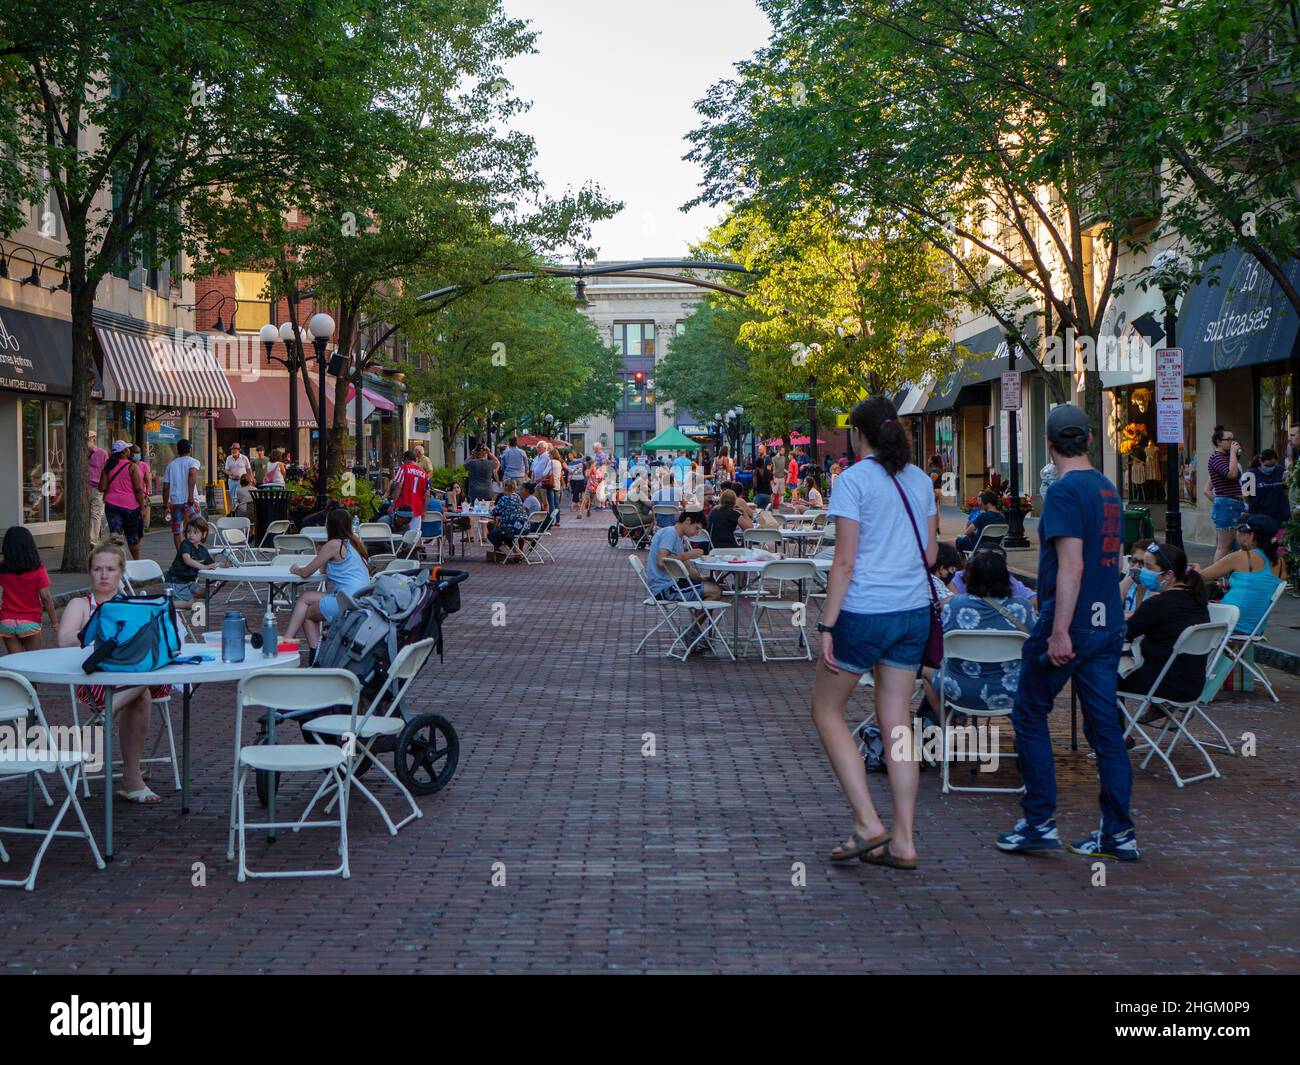 Thursday Night Out in Oak Park, Illinois. A summer outdoor dining event. Stock Photo